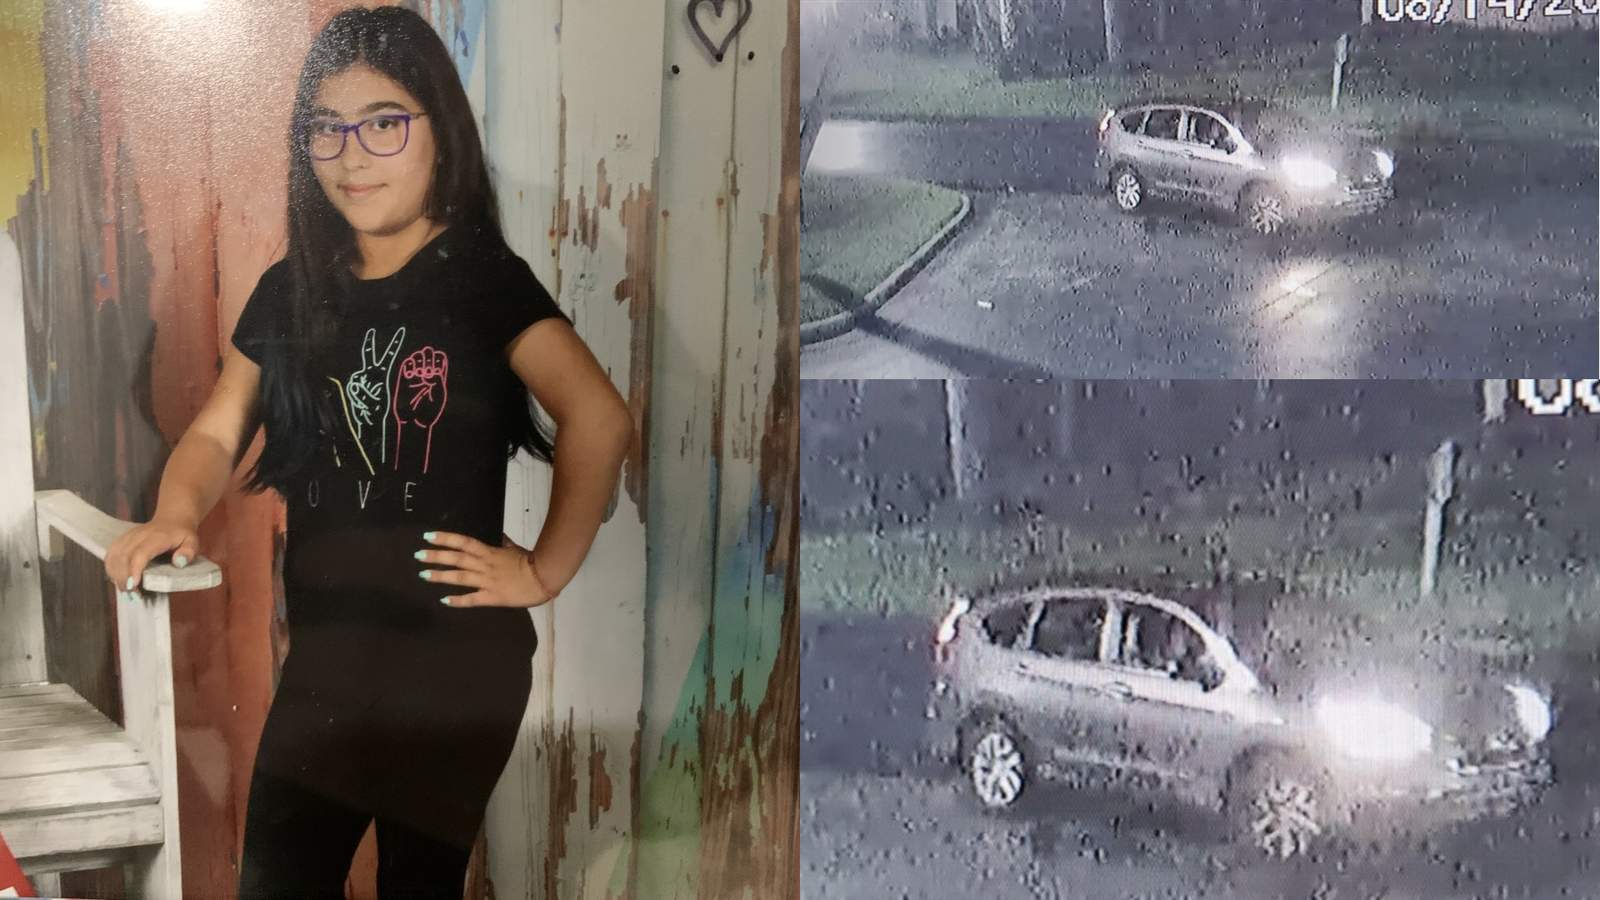 Missing 11-year-old Orlando girl sought after video shows her getting into car